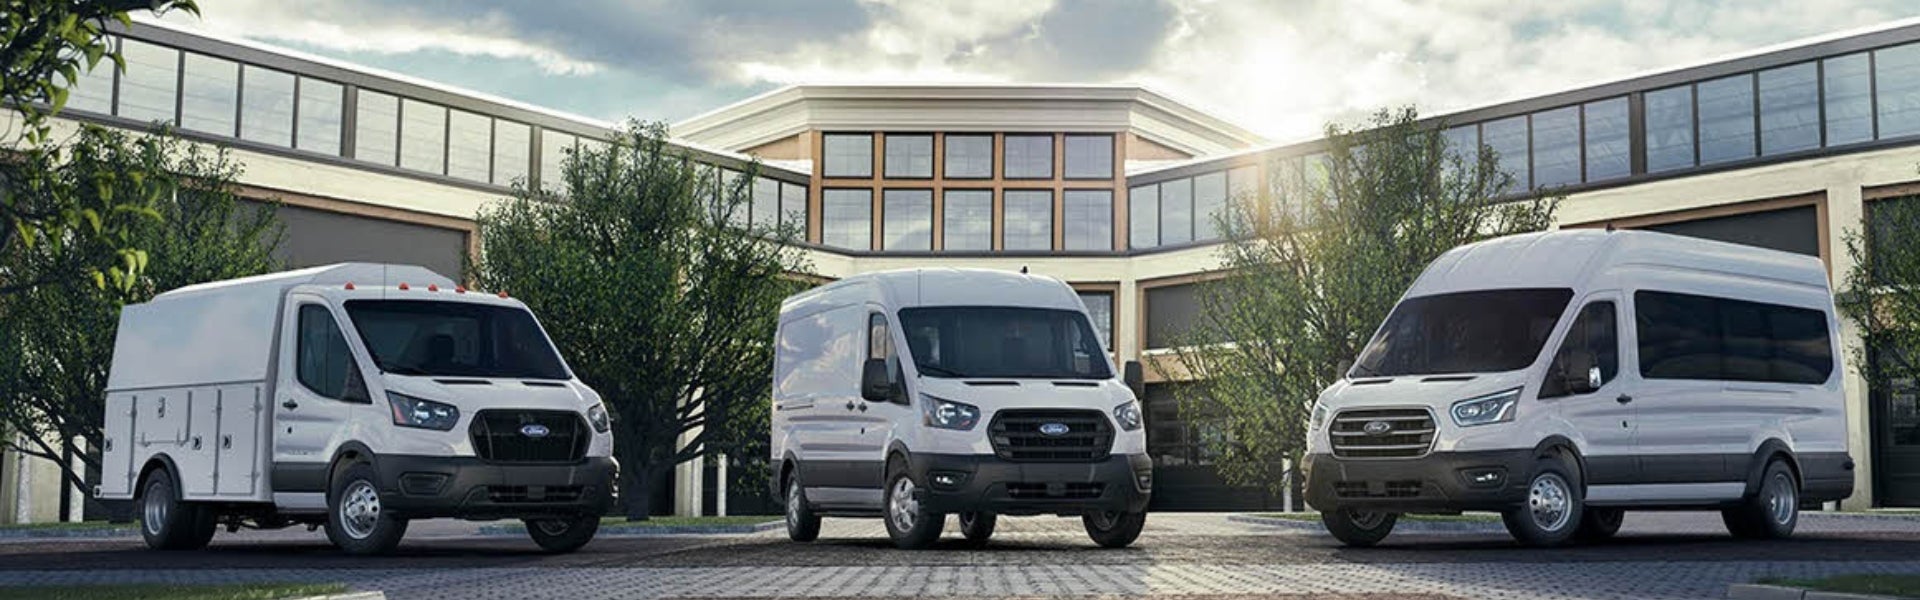 Ford Work Vans In Stock at Gresham Ford